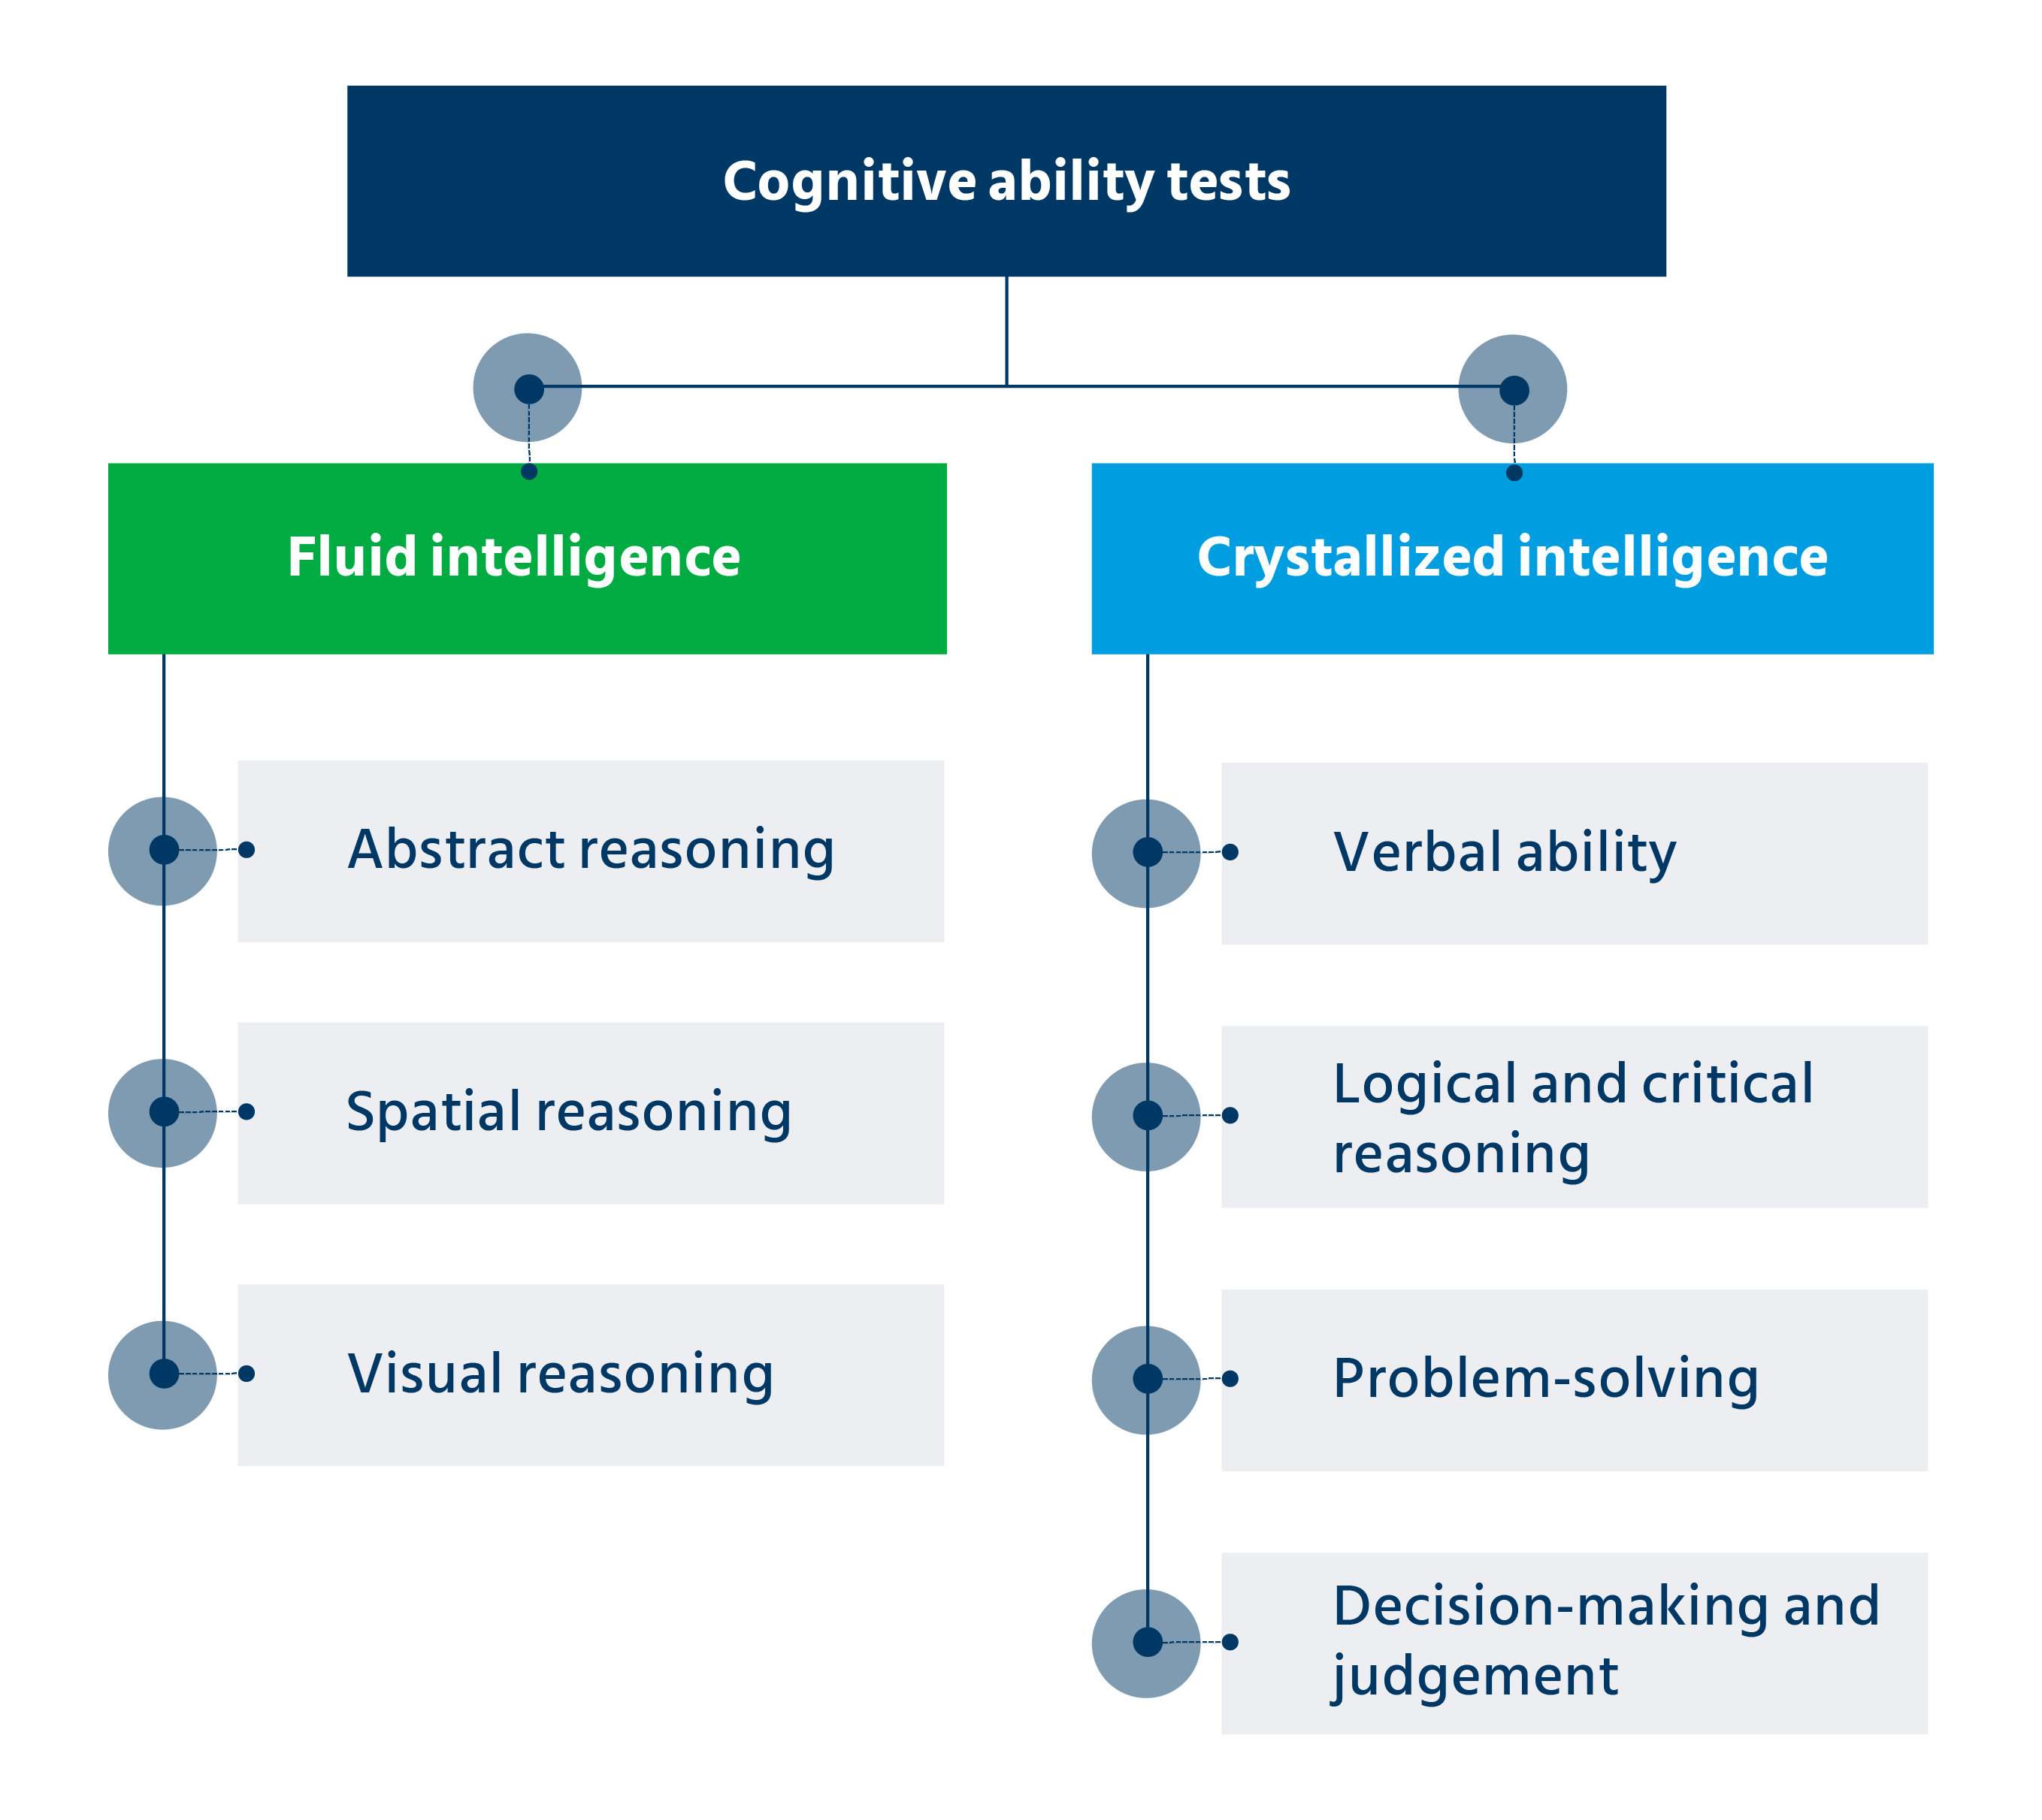 Cognitive ability tests measure two essential components of human intelligence: fluid and crystallized